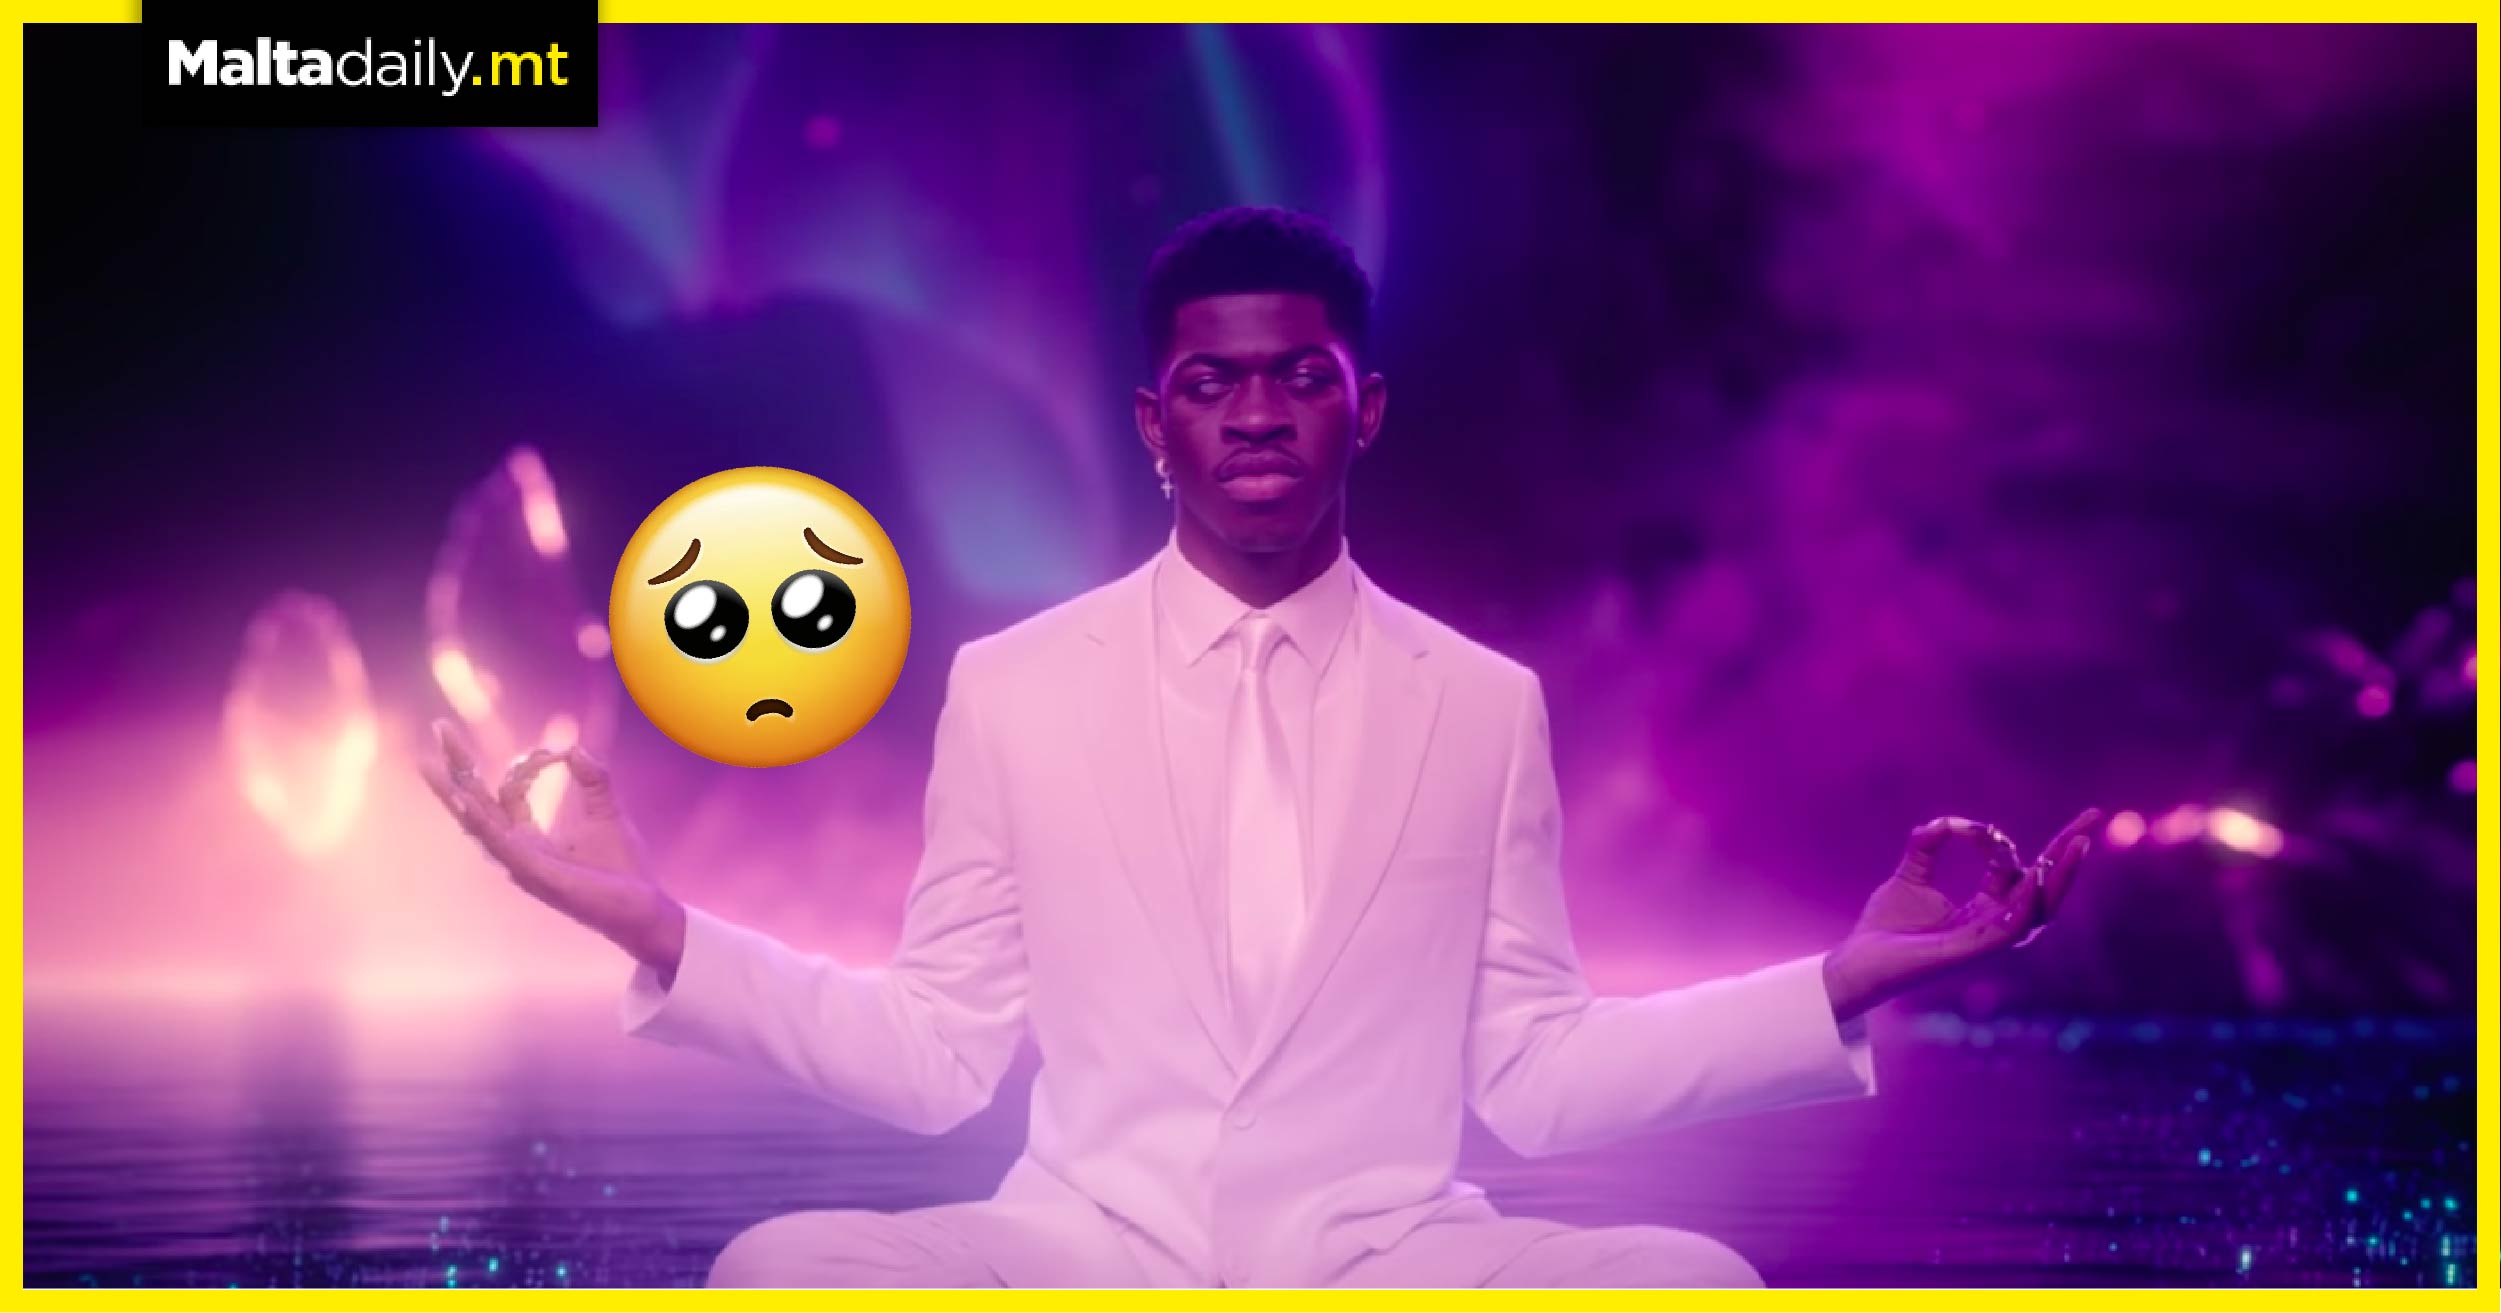 Lil Nas X dropped a new track last night and the internet can't handle it